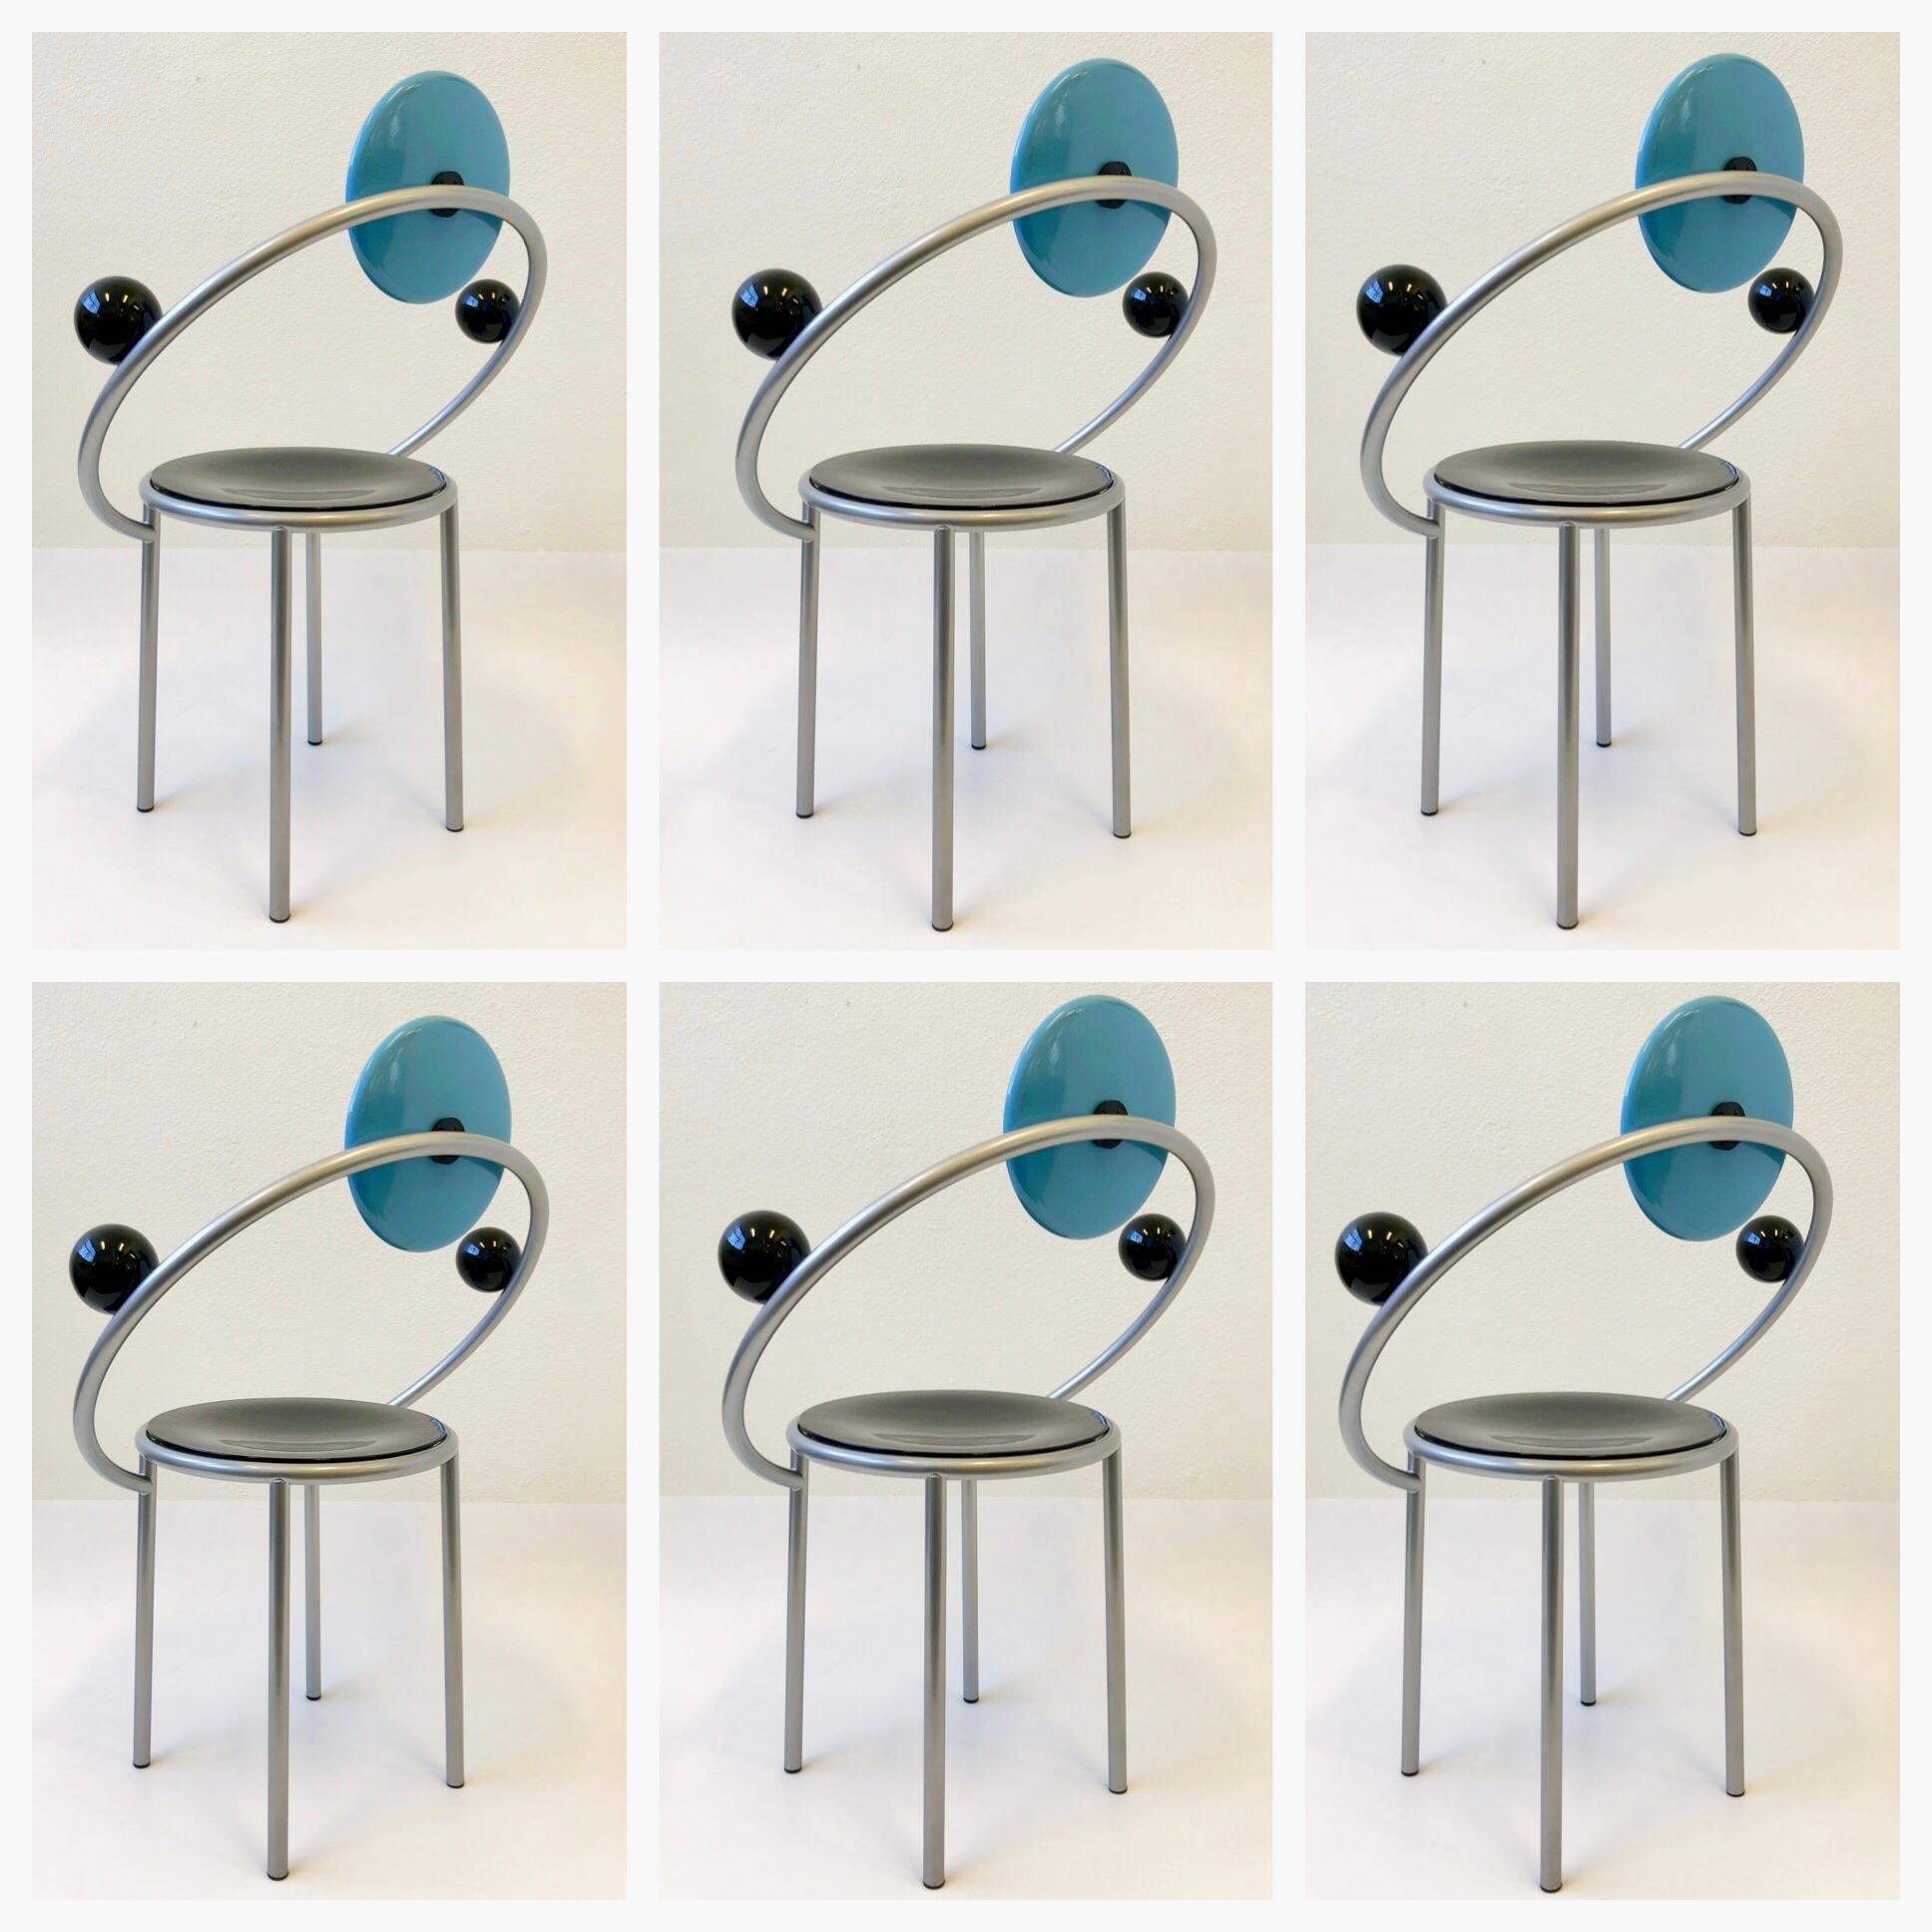 A spectacular set of six Italian Memphis “First Chair” designed by renowned Italian designer Michele De Lucci in 1983. This are in original condition. The chairs were used so they have some minor wear( please see detail photos). 

Dimension: 25.5”